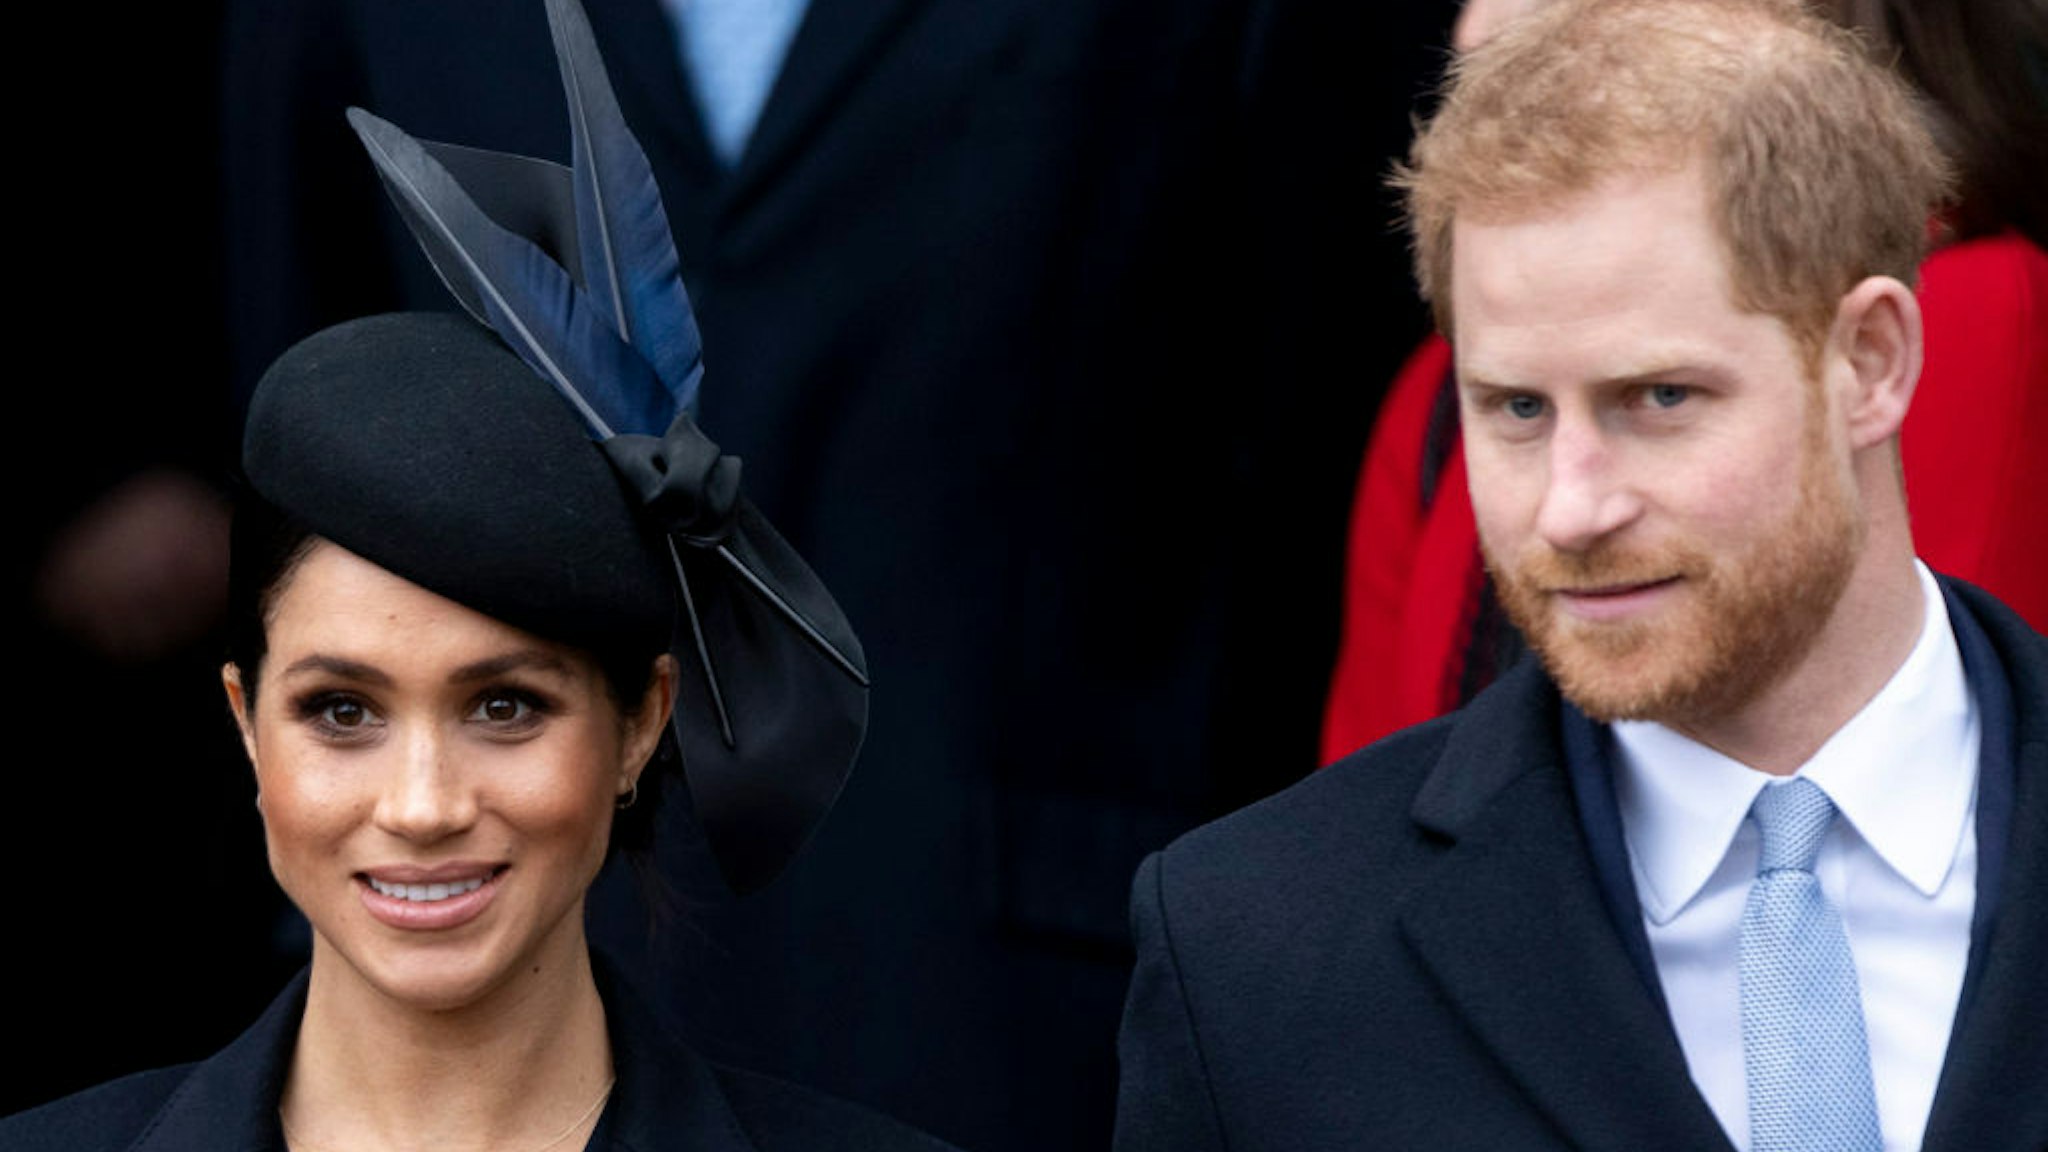 Meghan, Duchess of Sussex and Prince Harry, Duke of Sussex attend Christmas Day Church service at Church of St Mary Magdalene on the Sandringham estate on December 25, 2018 in King's Lynn, England.